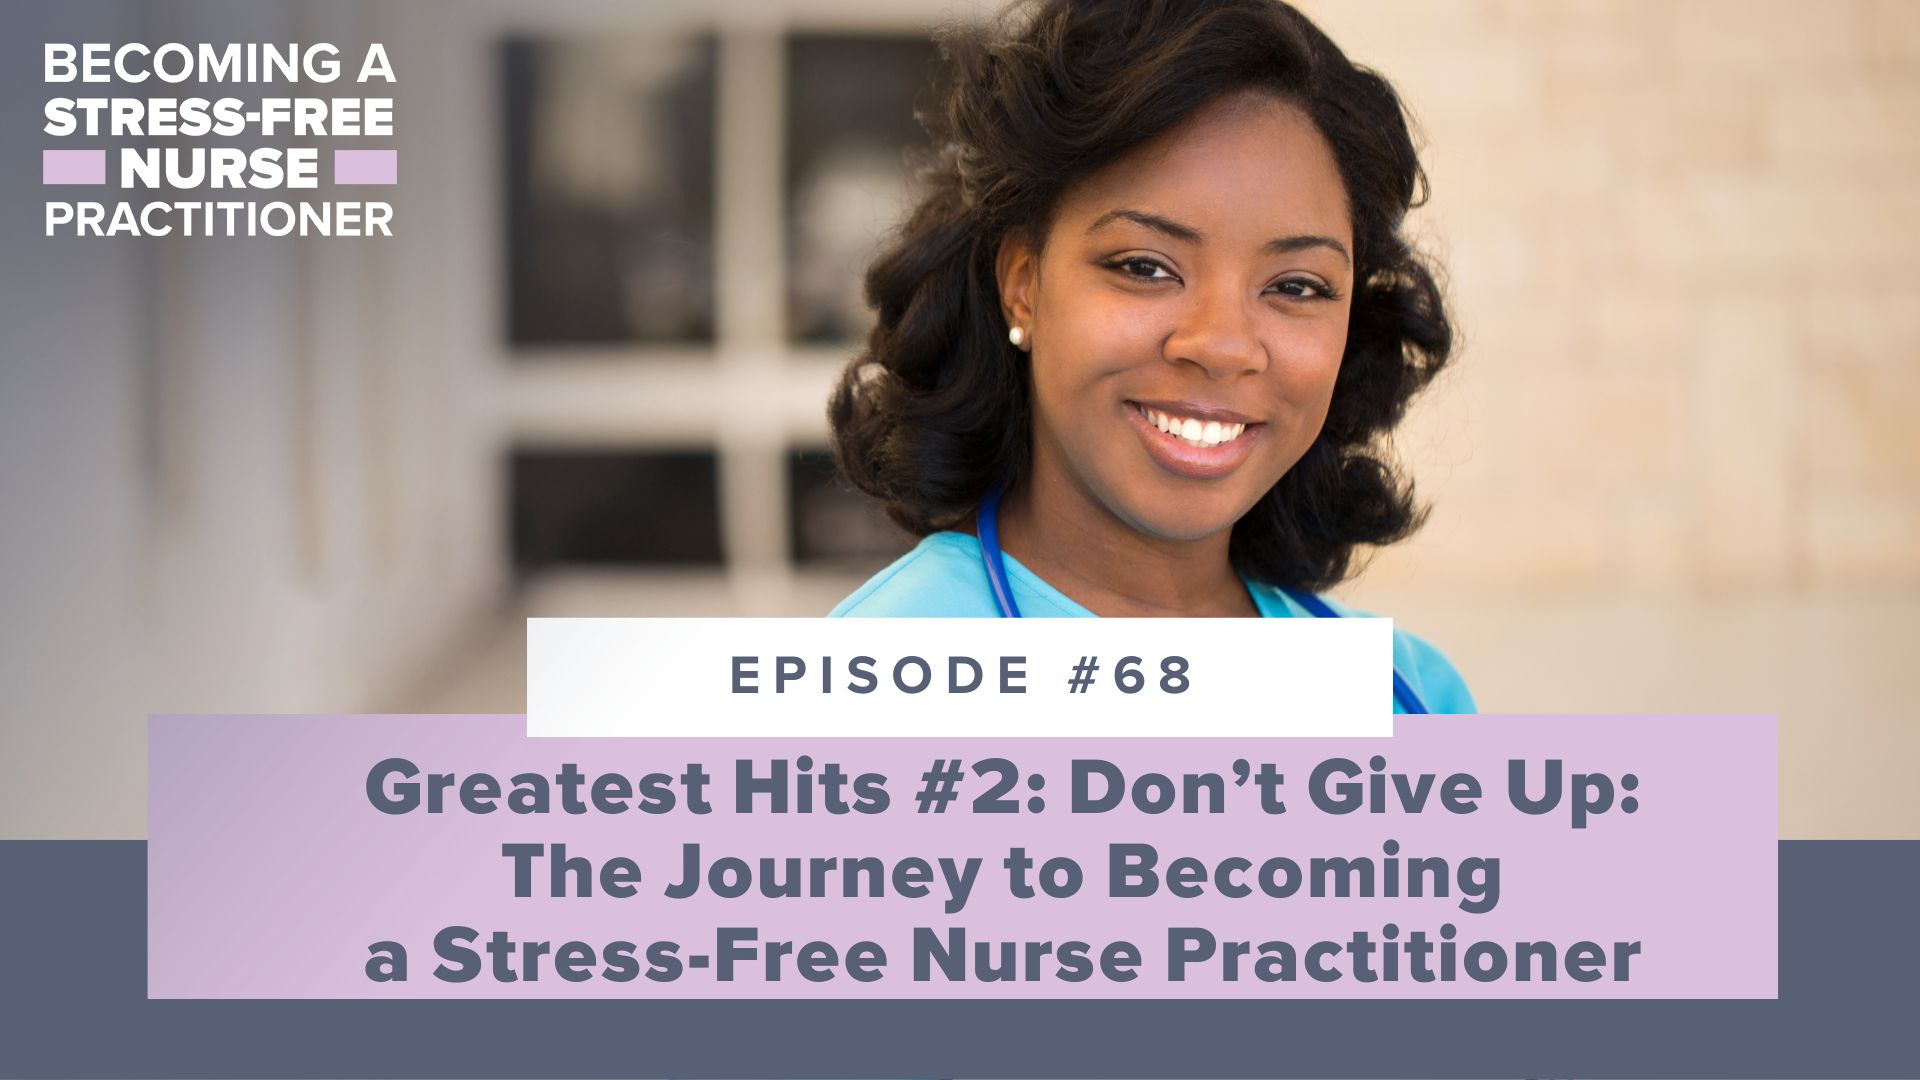 SMNP Blog - Ep #68: Greatest Hits #2: Don’t Give Up: The Journey to Becoming a Stress-Free Nurse Practitioner